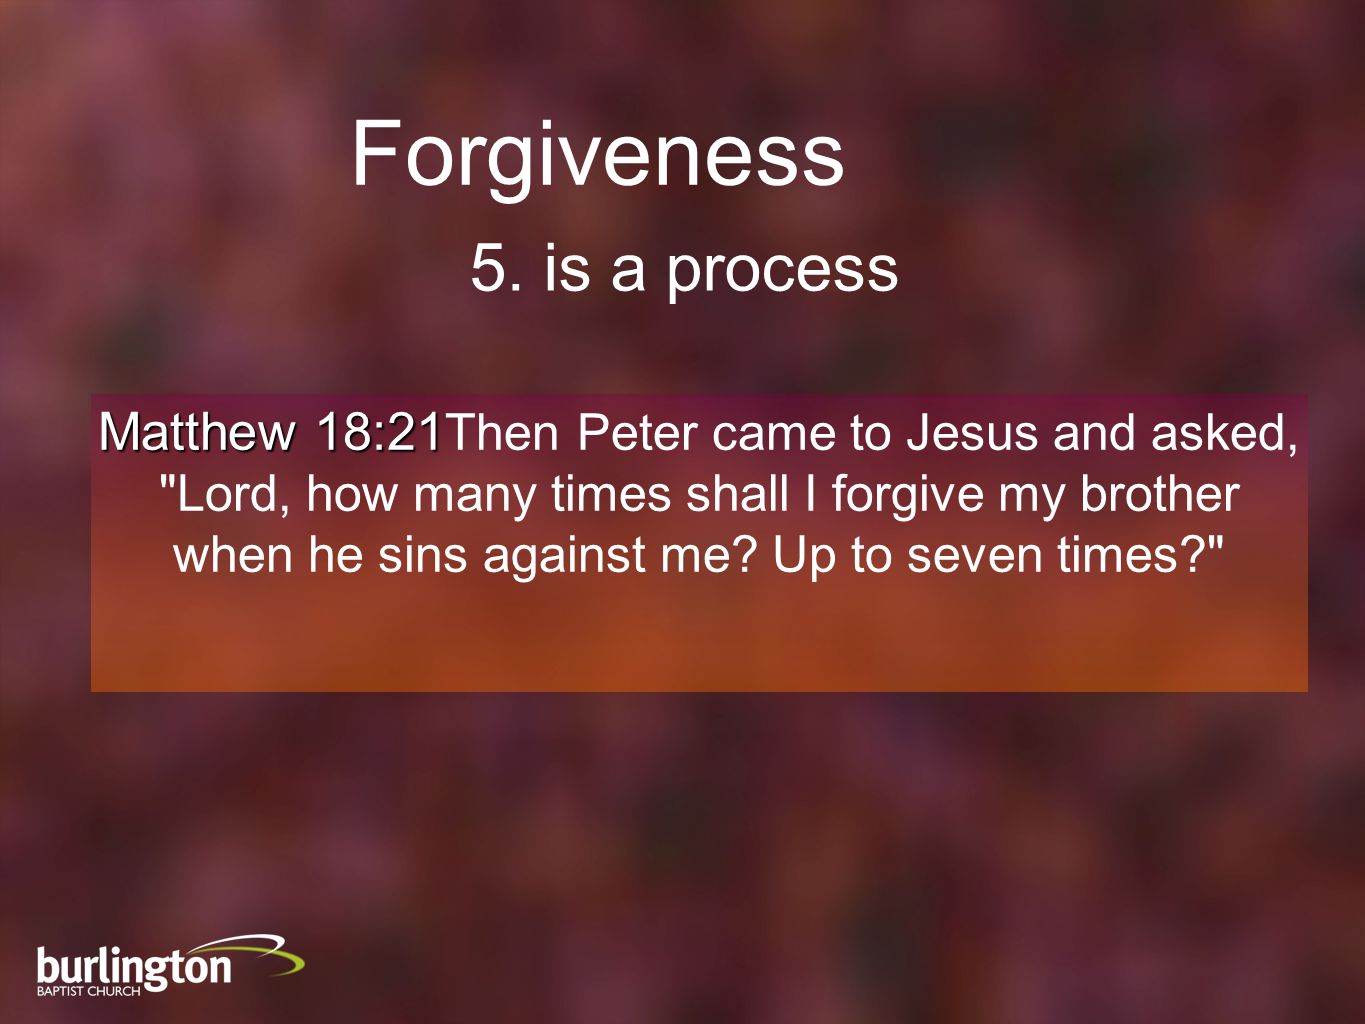 Matthew 18:21 Then Peter came to Jesus and asked, Lord, how many times shall I forgive my brother when he sins against me.